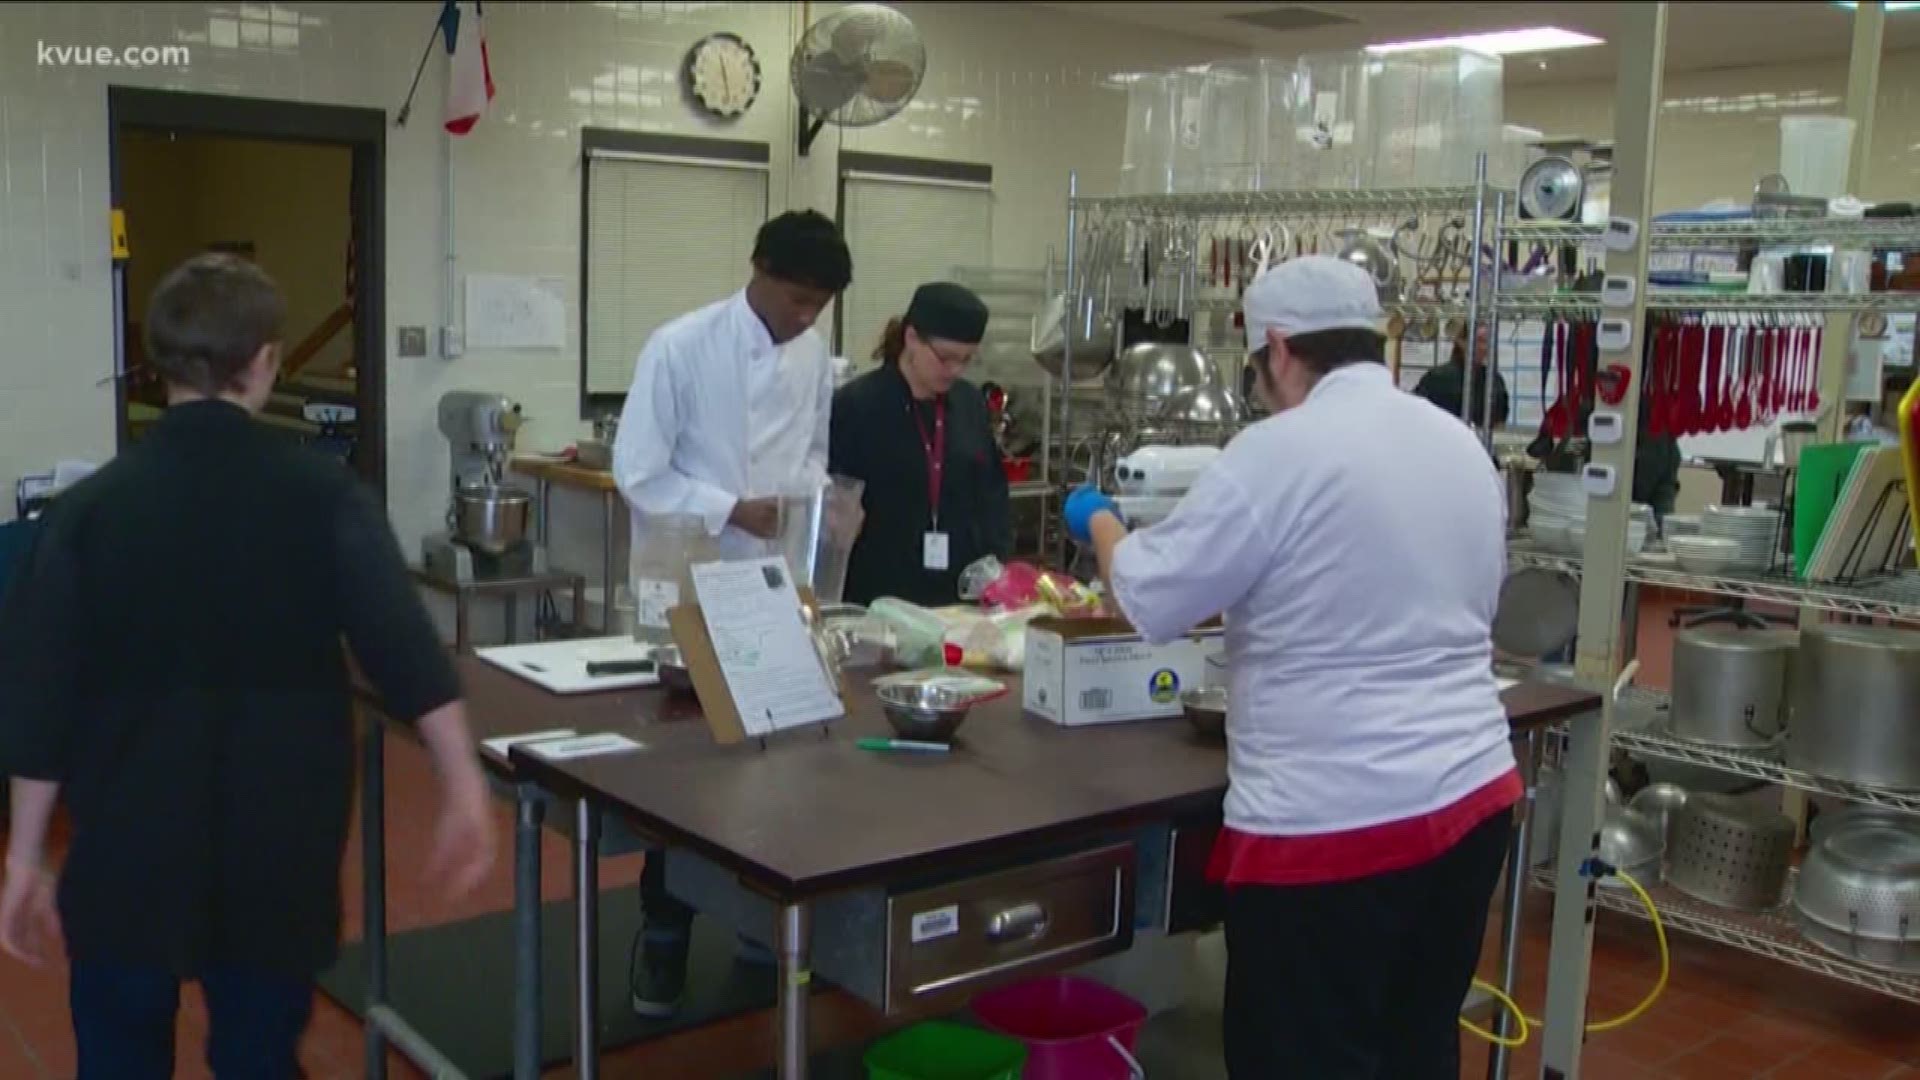 This three-year culinary program is preparing students with special needs for success.